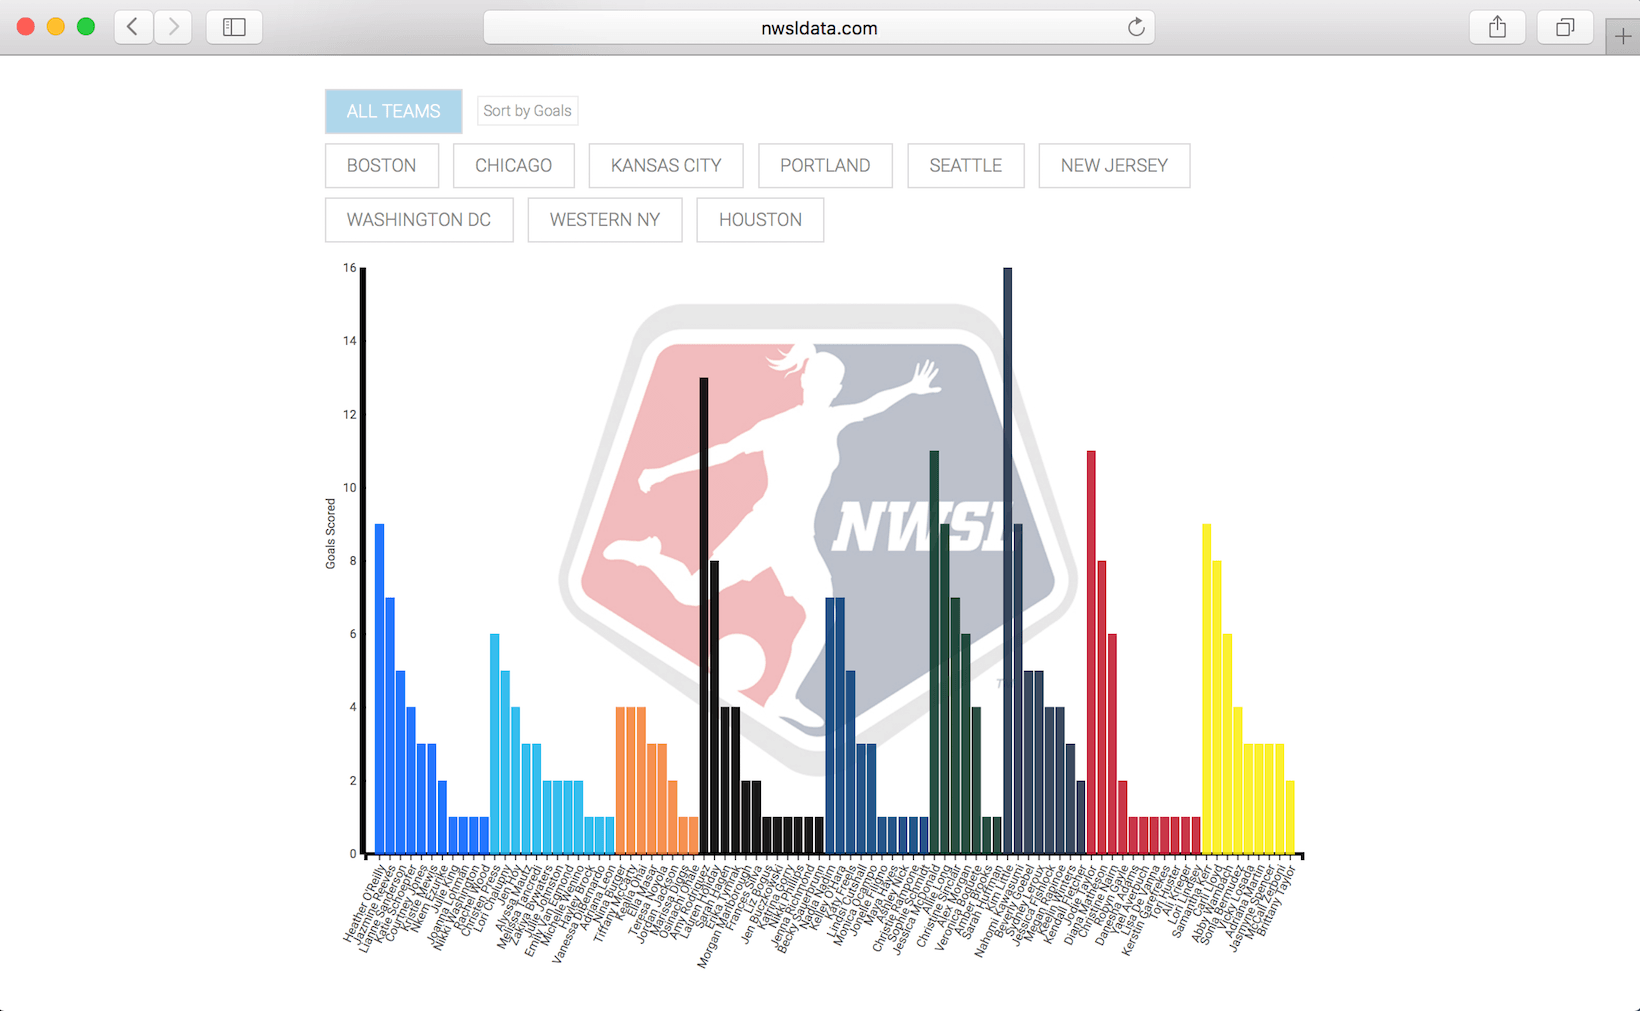 A screenshot of a graph showing the total goals scored per player.